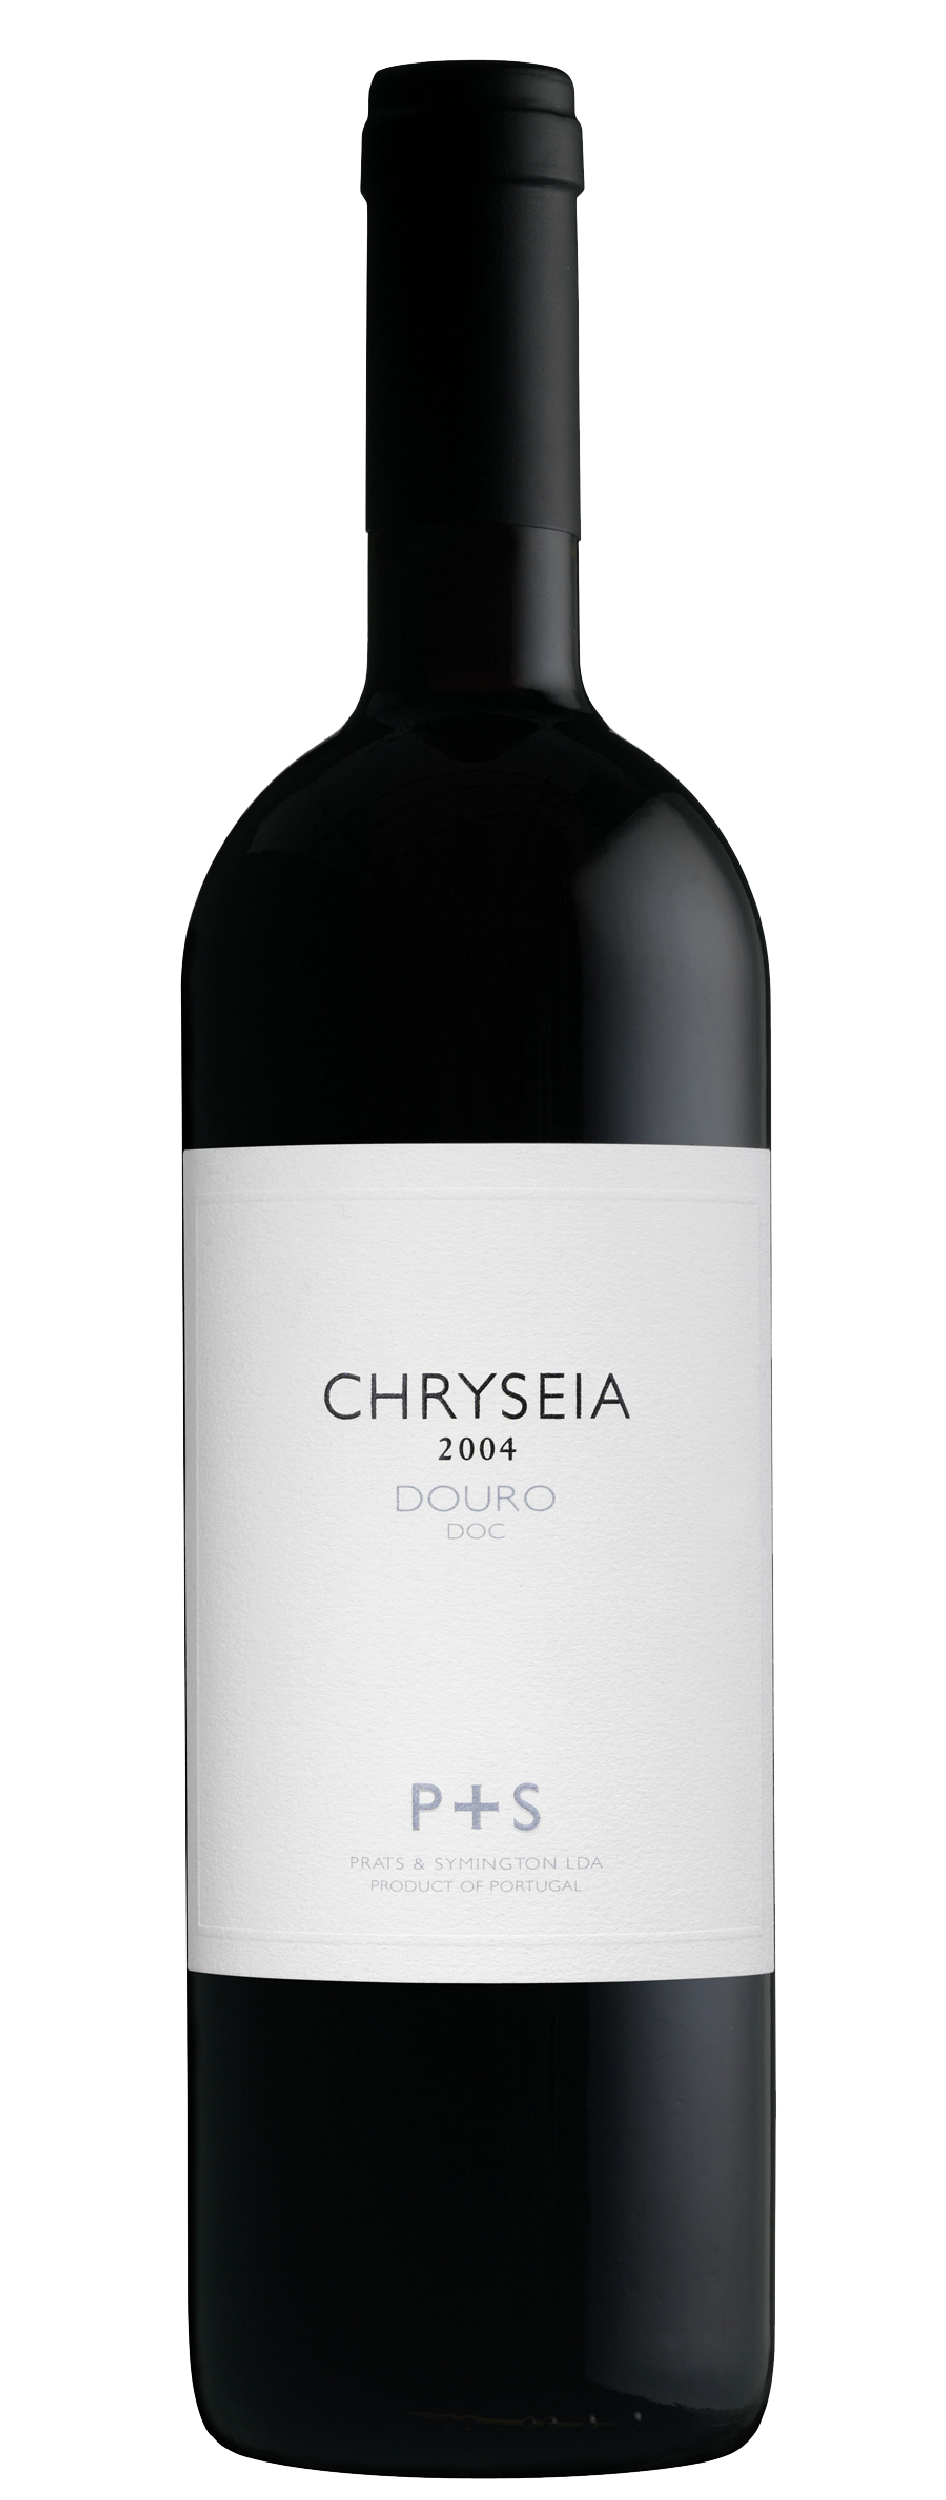 Product Image for P&S CHRYSEIA DOURO RED 2004